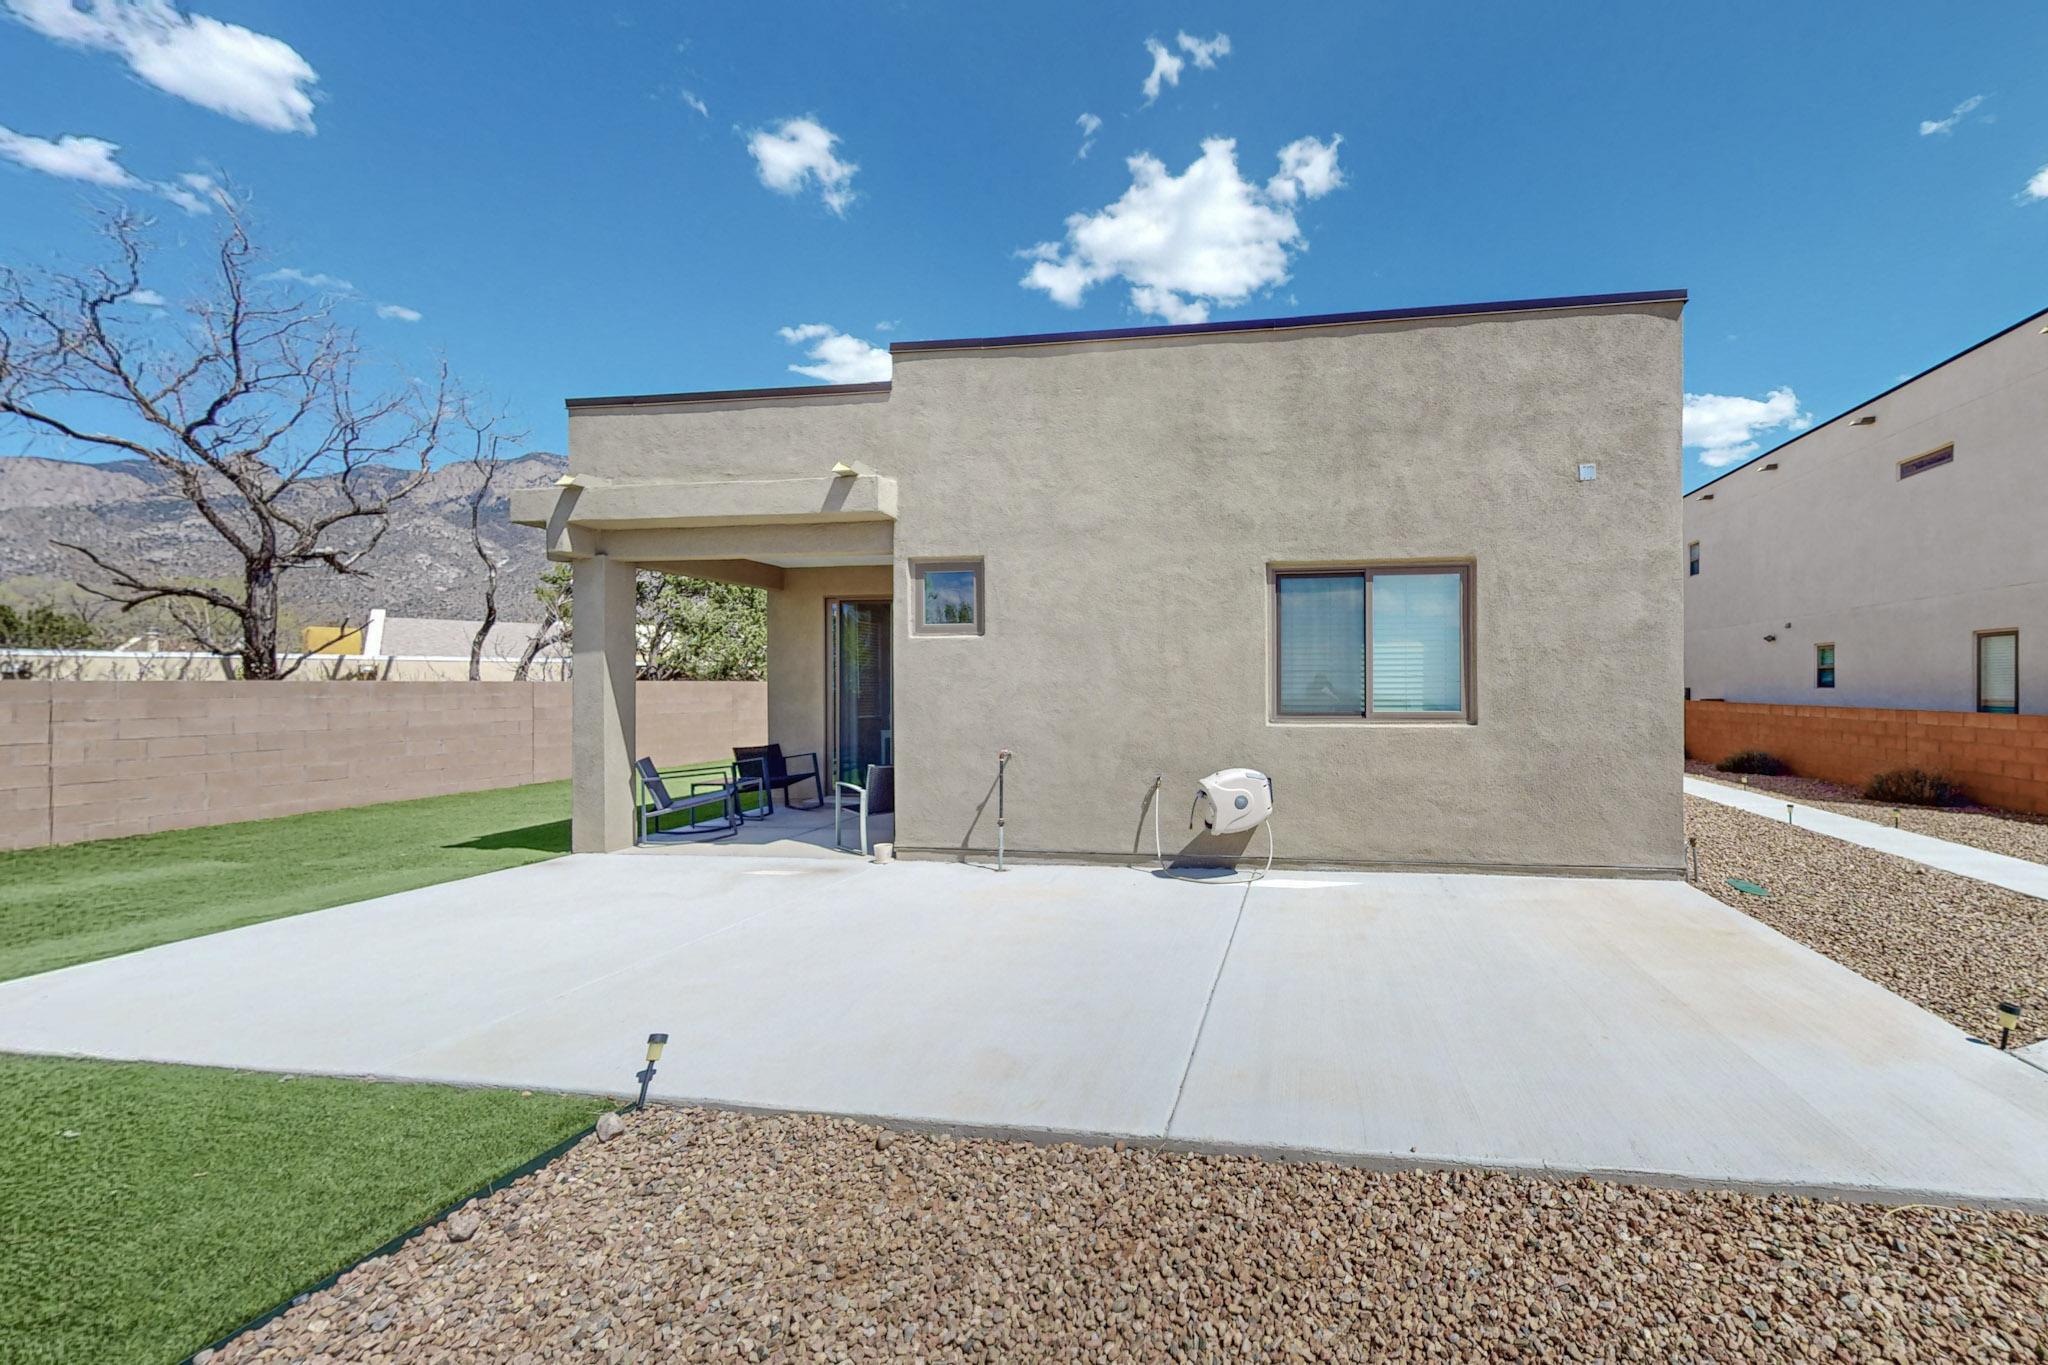 819 Horned Owl Drive NE, Albuquerque, New Mexico 87122, 3 Bedrooms Bedrooms, ,2 BathroomsBathrooms,Residential,For Sale,819 Horned Owl Drive NE,1061472